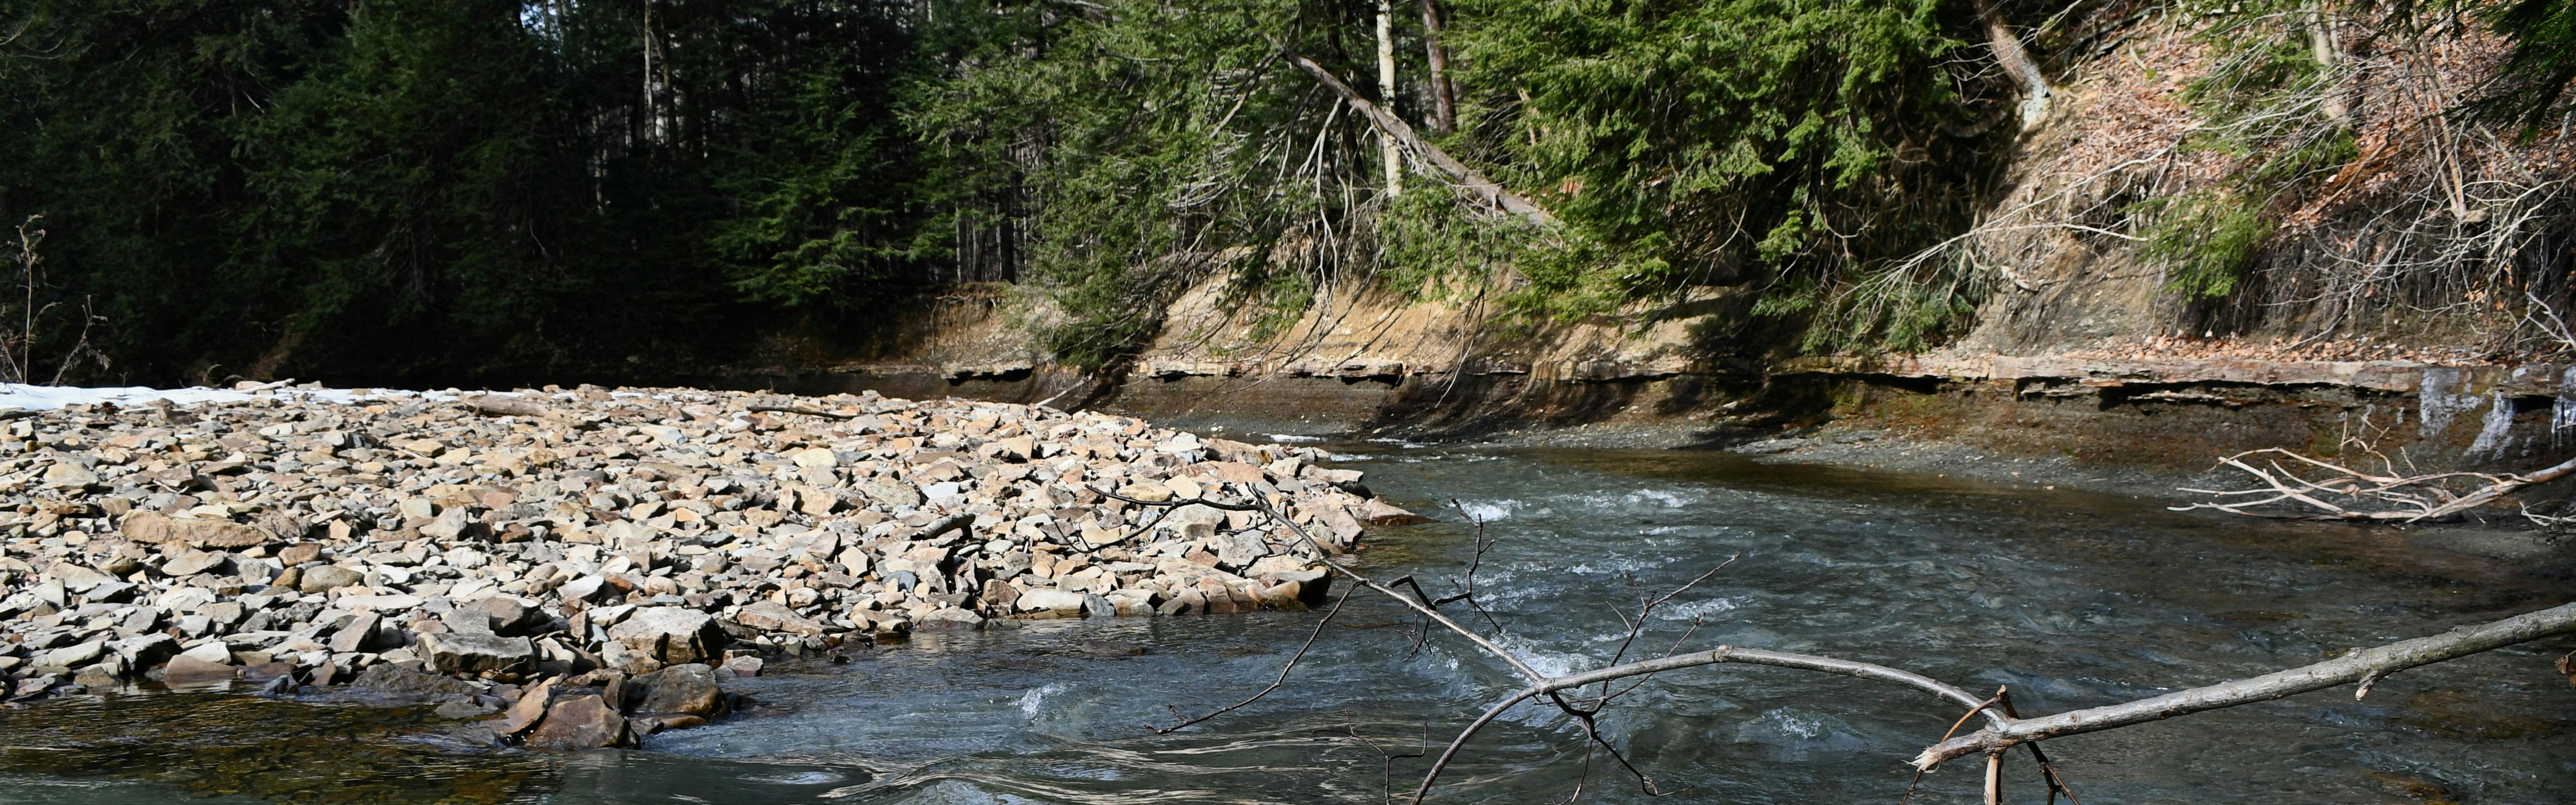 A river bends around a rocky bank. There is tree debris in the water.  